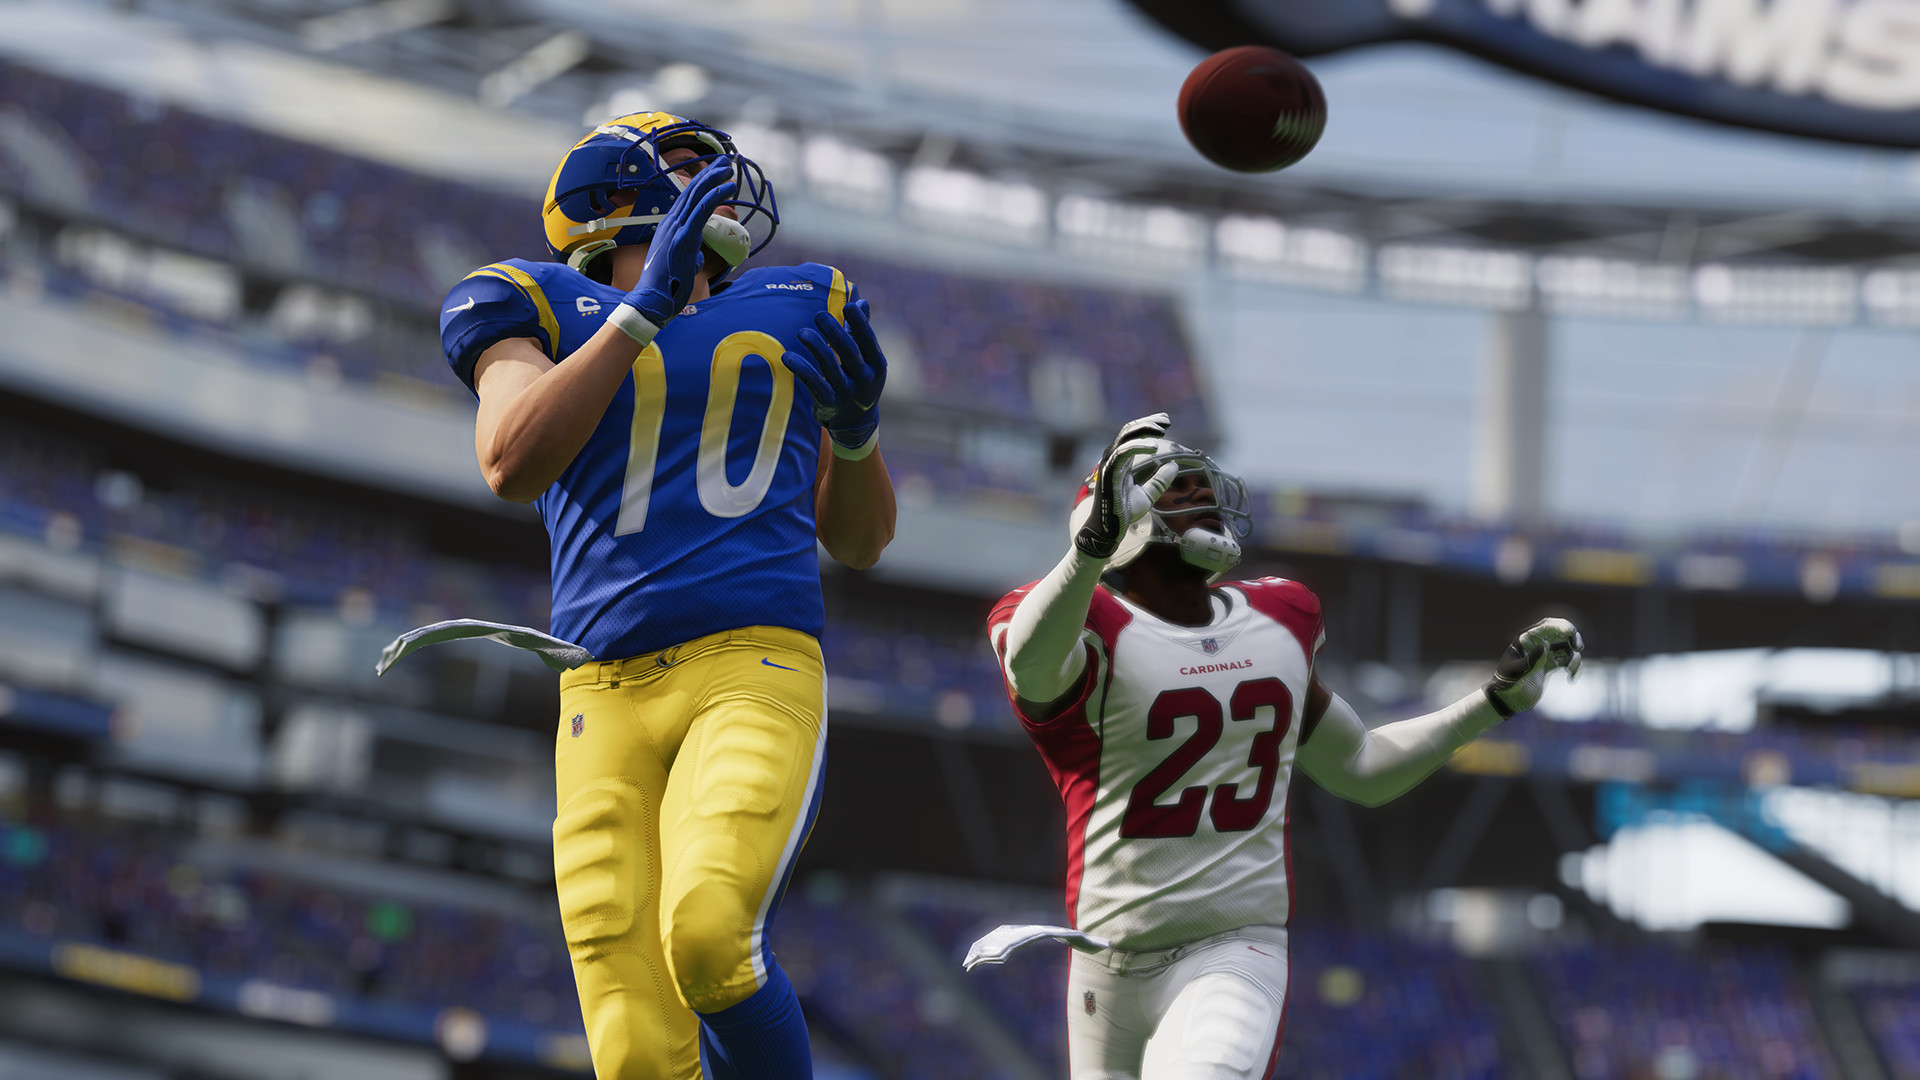 Five Tips On How To Win More In Madden NFL 23 Ultimate Team